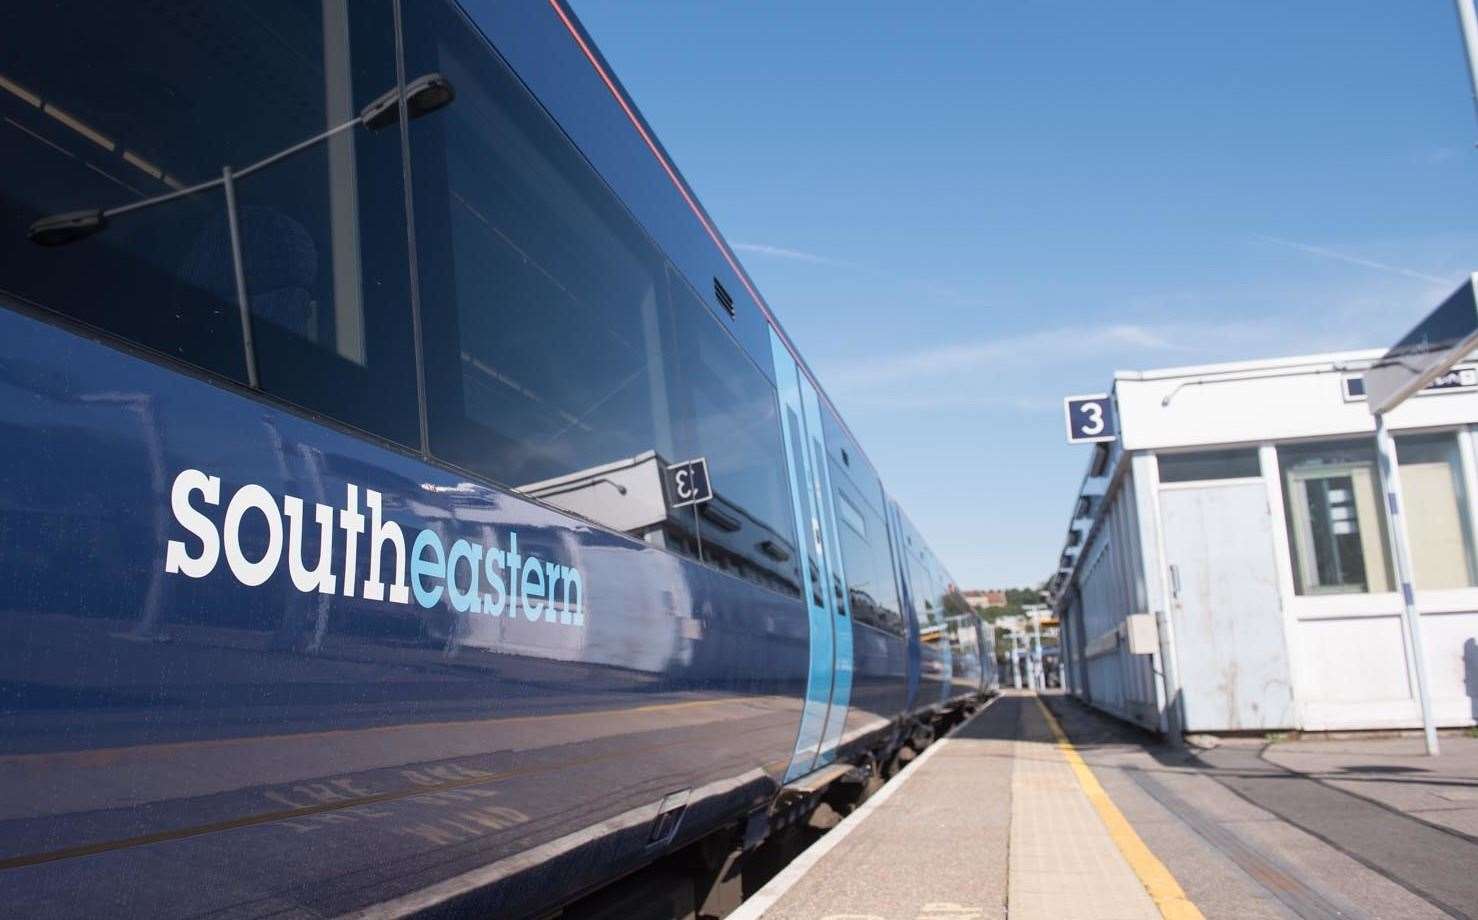 Southeastern services between Maidstone and Ashford are suspended